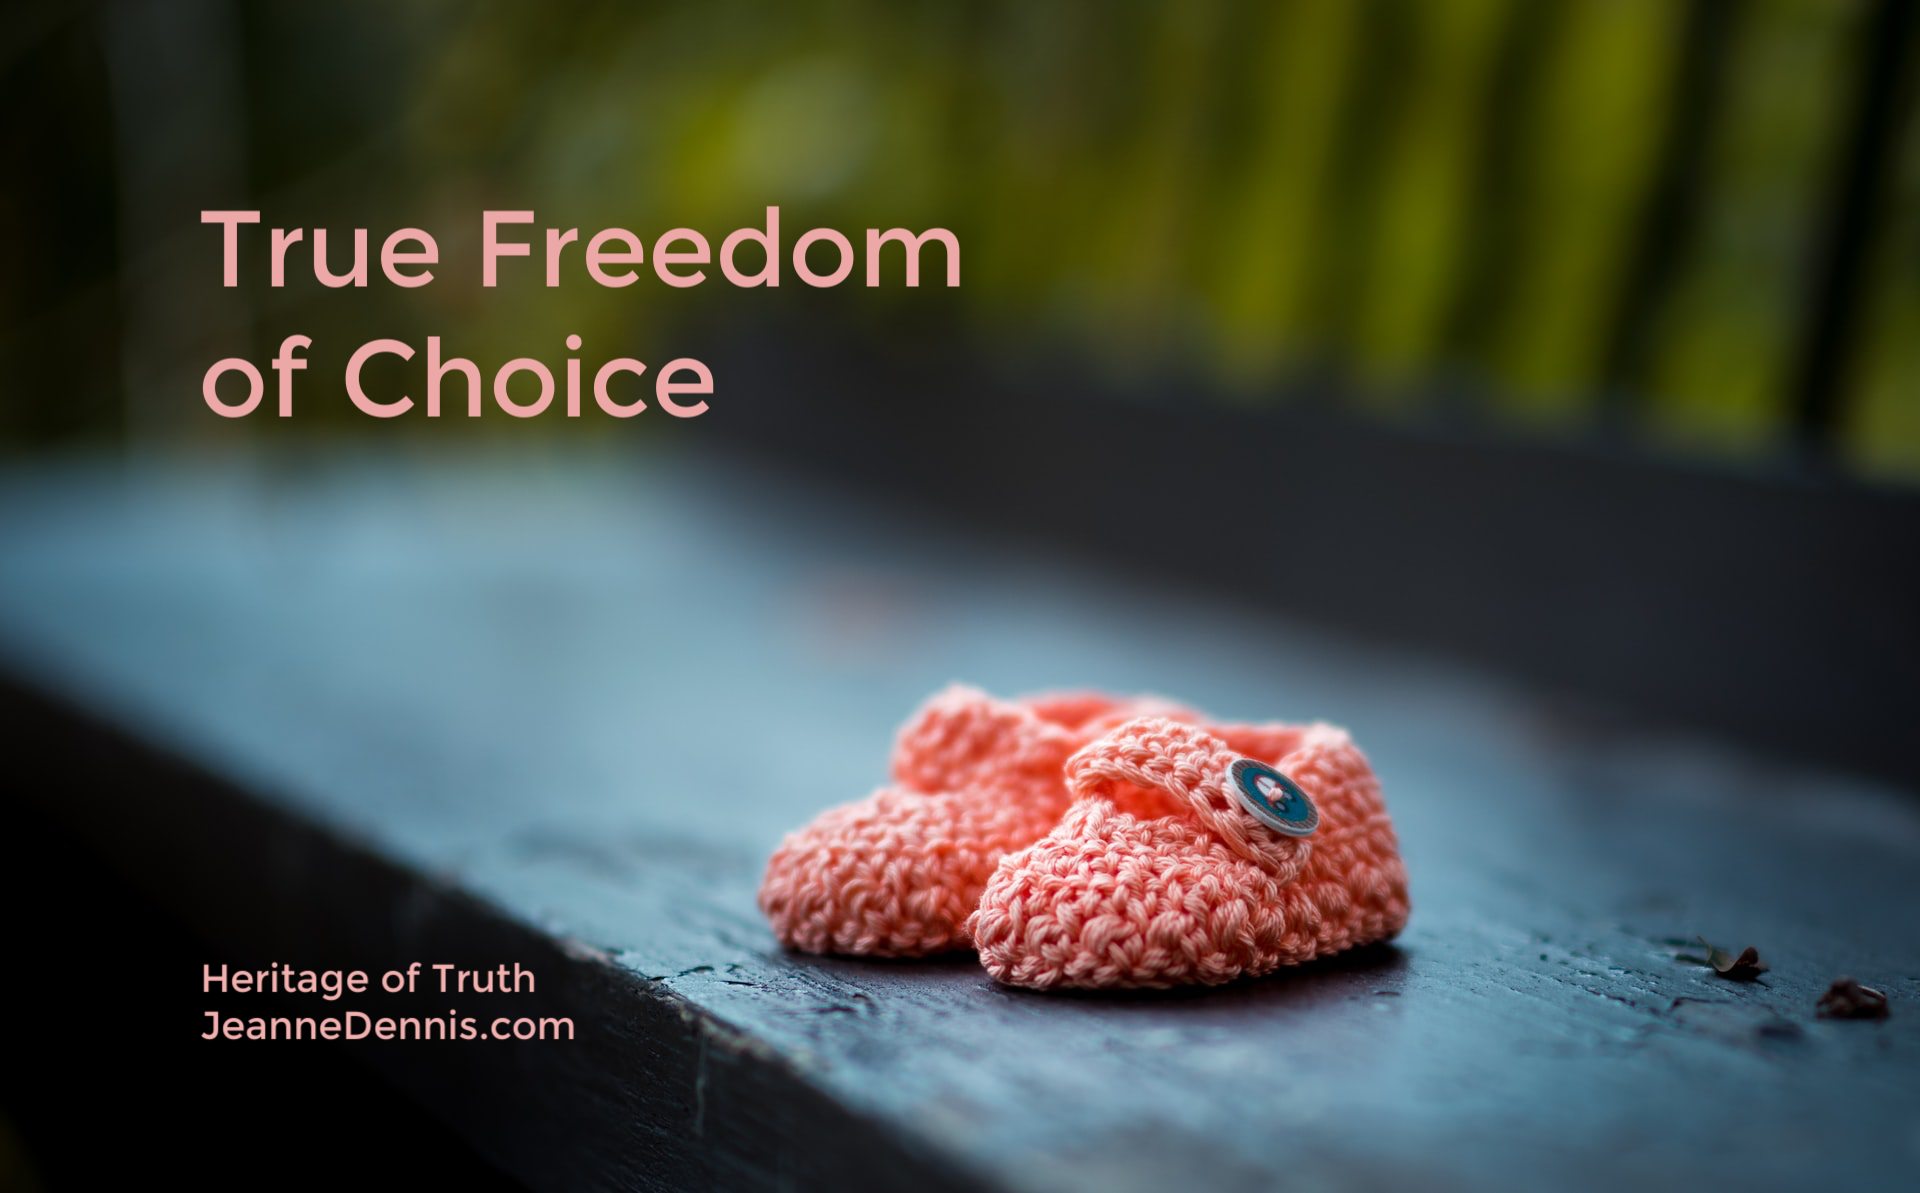 True Freedom of Choice, Heritage of Truth, JeanneDennis.com